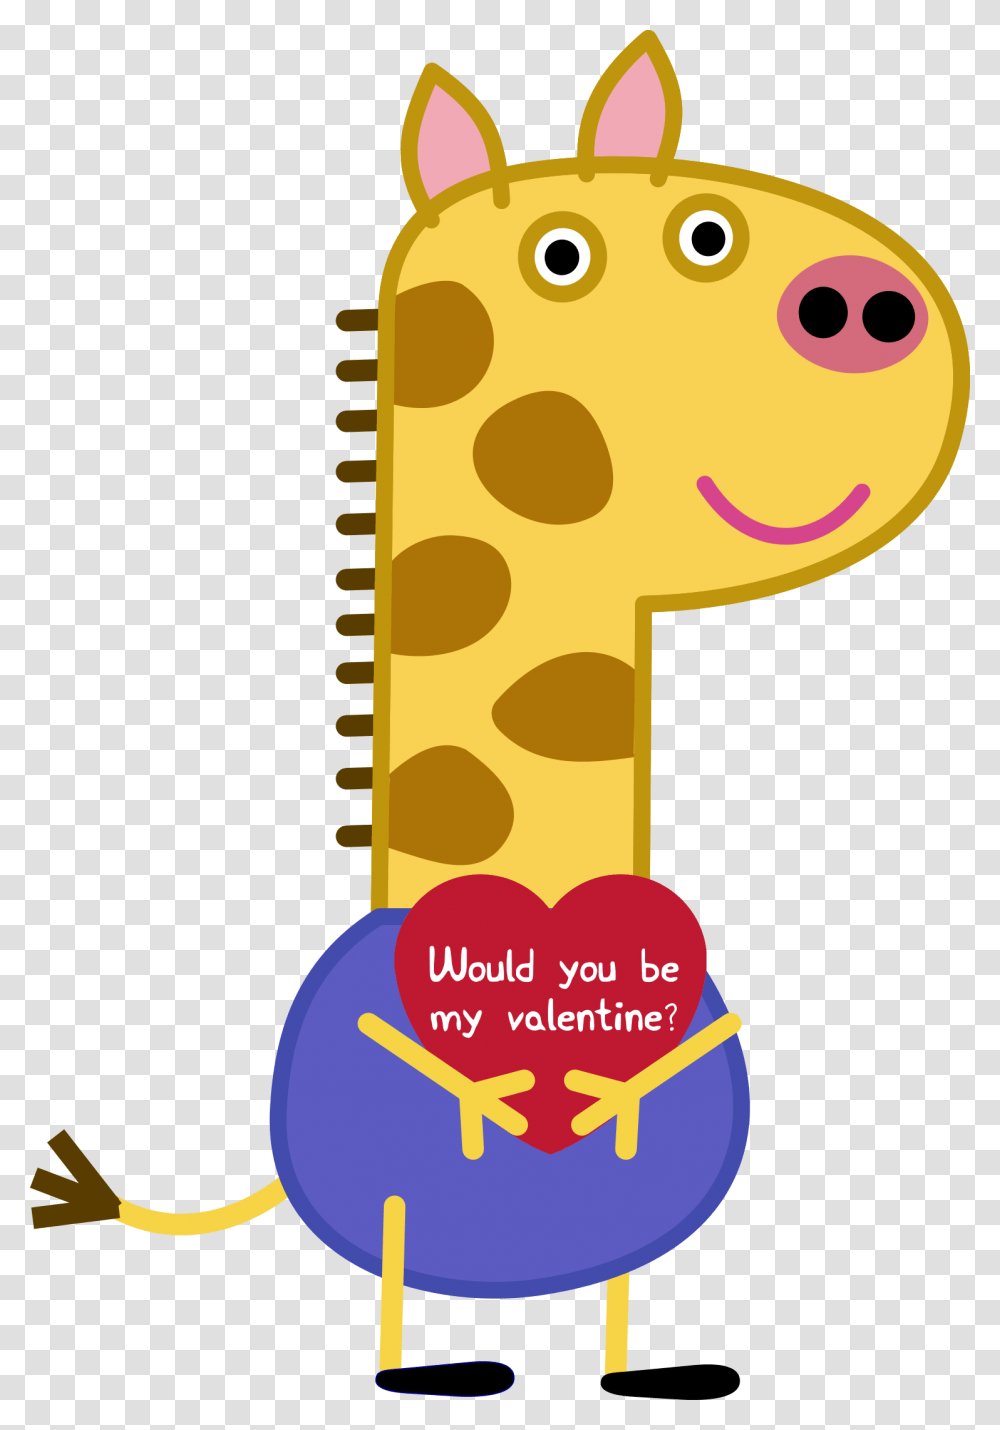 Gerald Giraffe From Peppa Pig, Sweets, Food, Leisure Activities Transparent Png